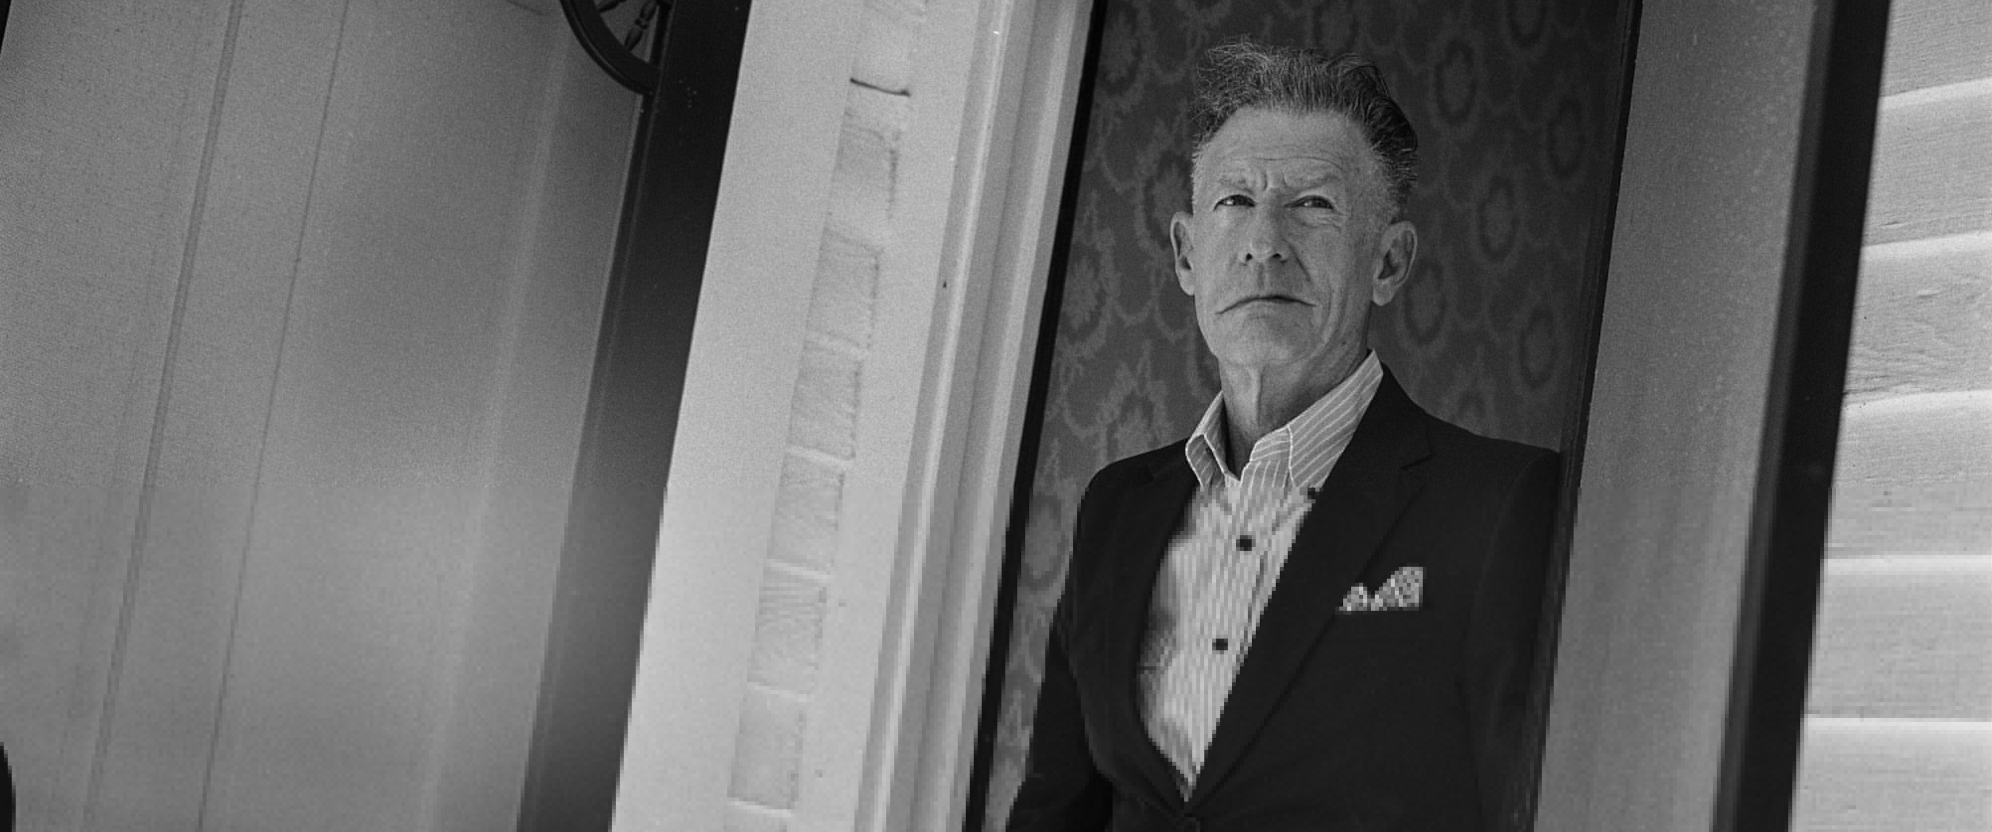 From Music Lessons to Grammy Awards, Lyle Lovett Appreciates His Good Creative Fortunes